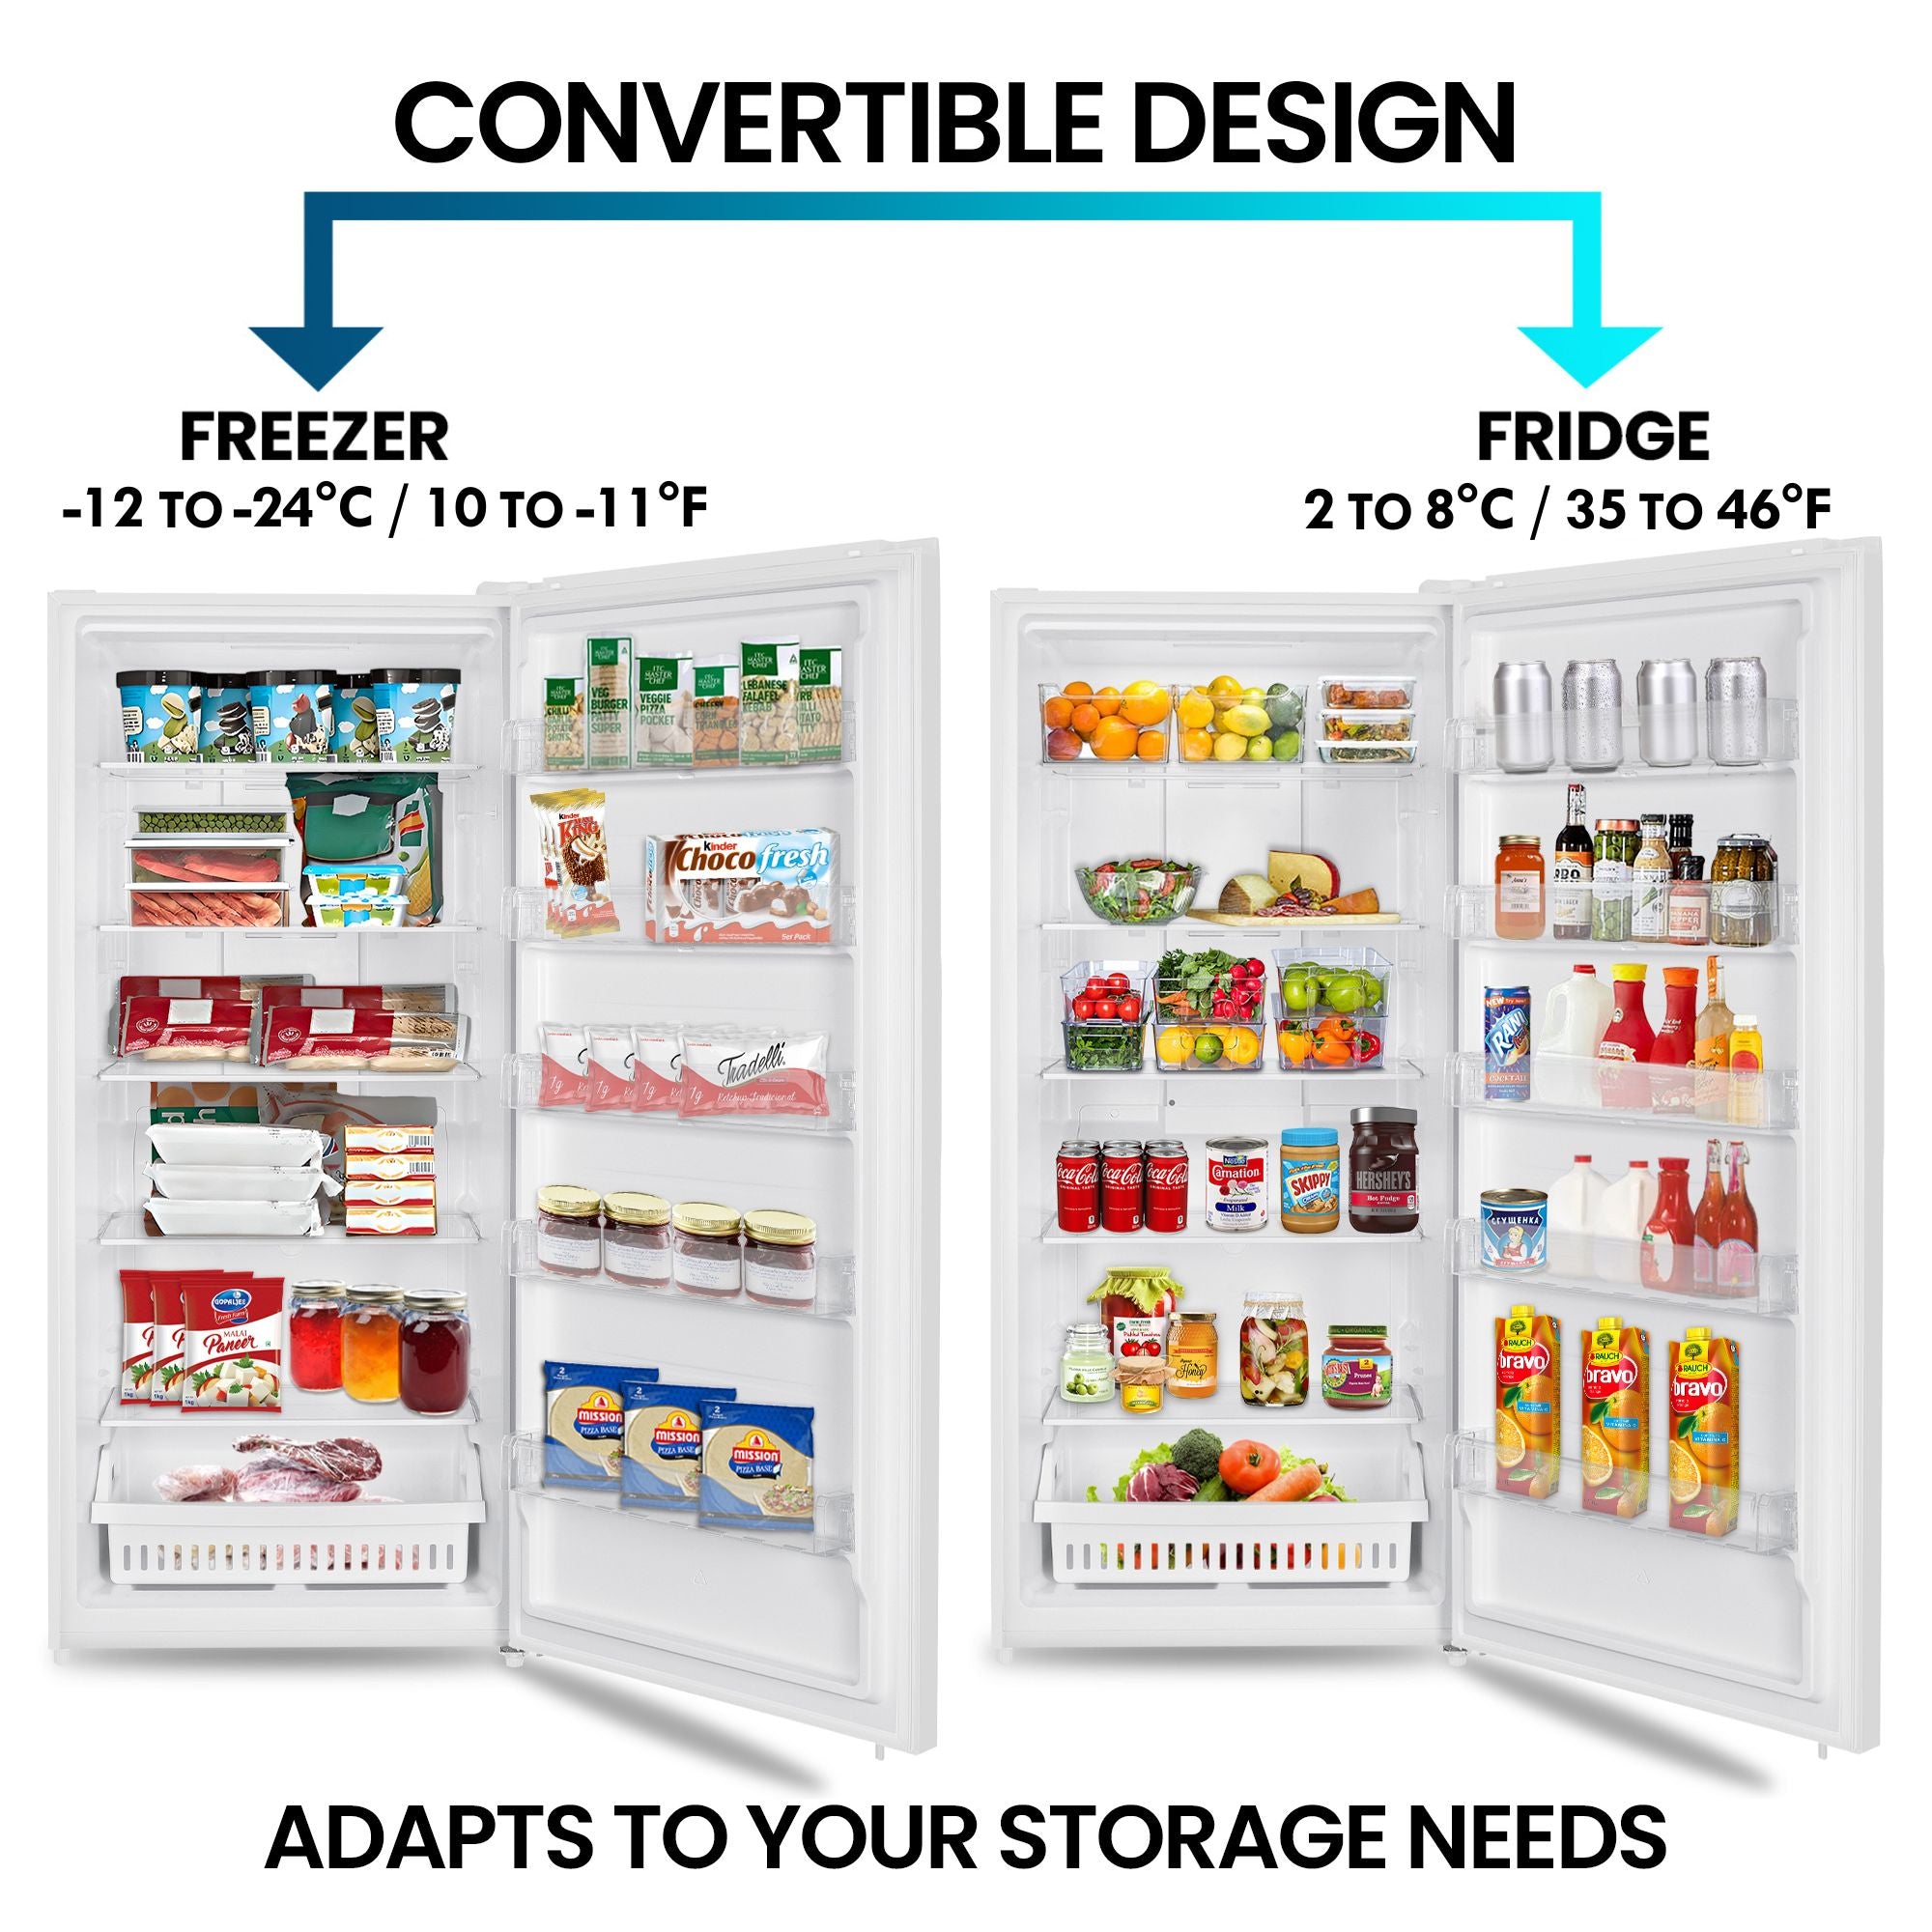 Two pictures show the Kenmore upright convertible open and filled with food items being used as a freezer and a refrigerator. Text above reads, "Convertible design: Freezer -12°C to -24°C; Fridge 2°C to 8°C," and text below reads, "Adapts to your unique storage needs."